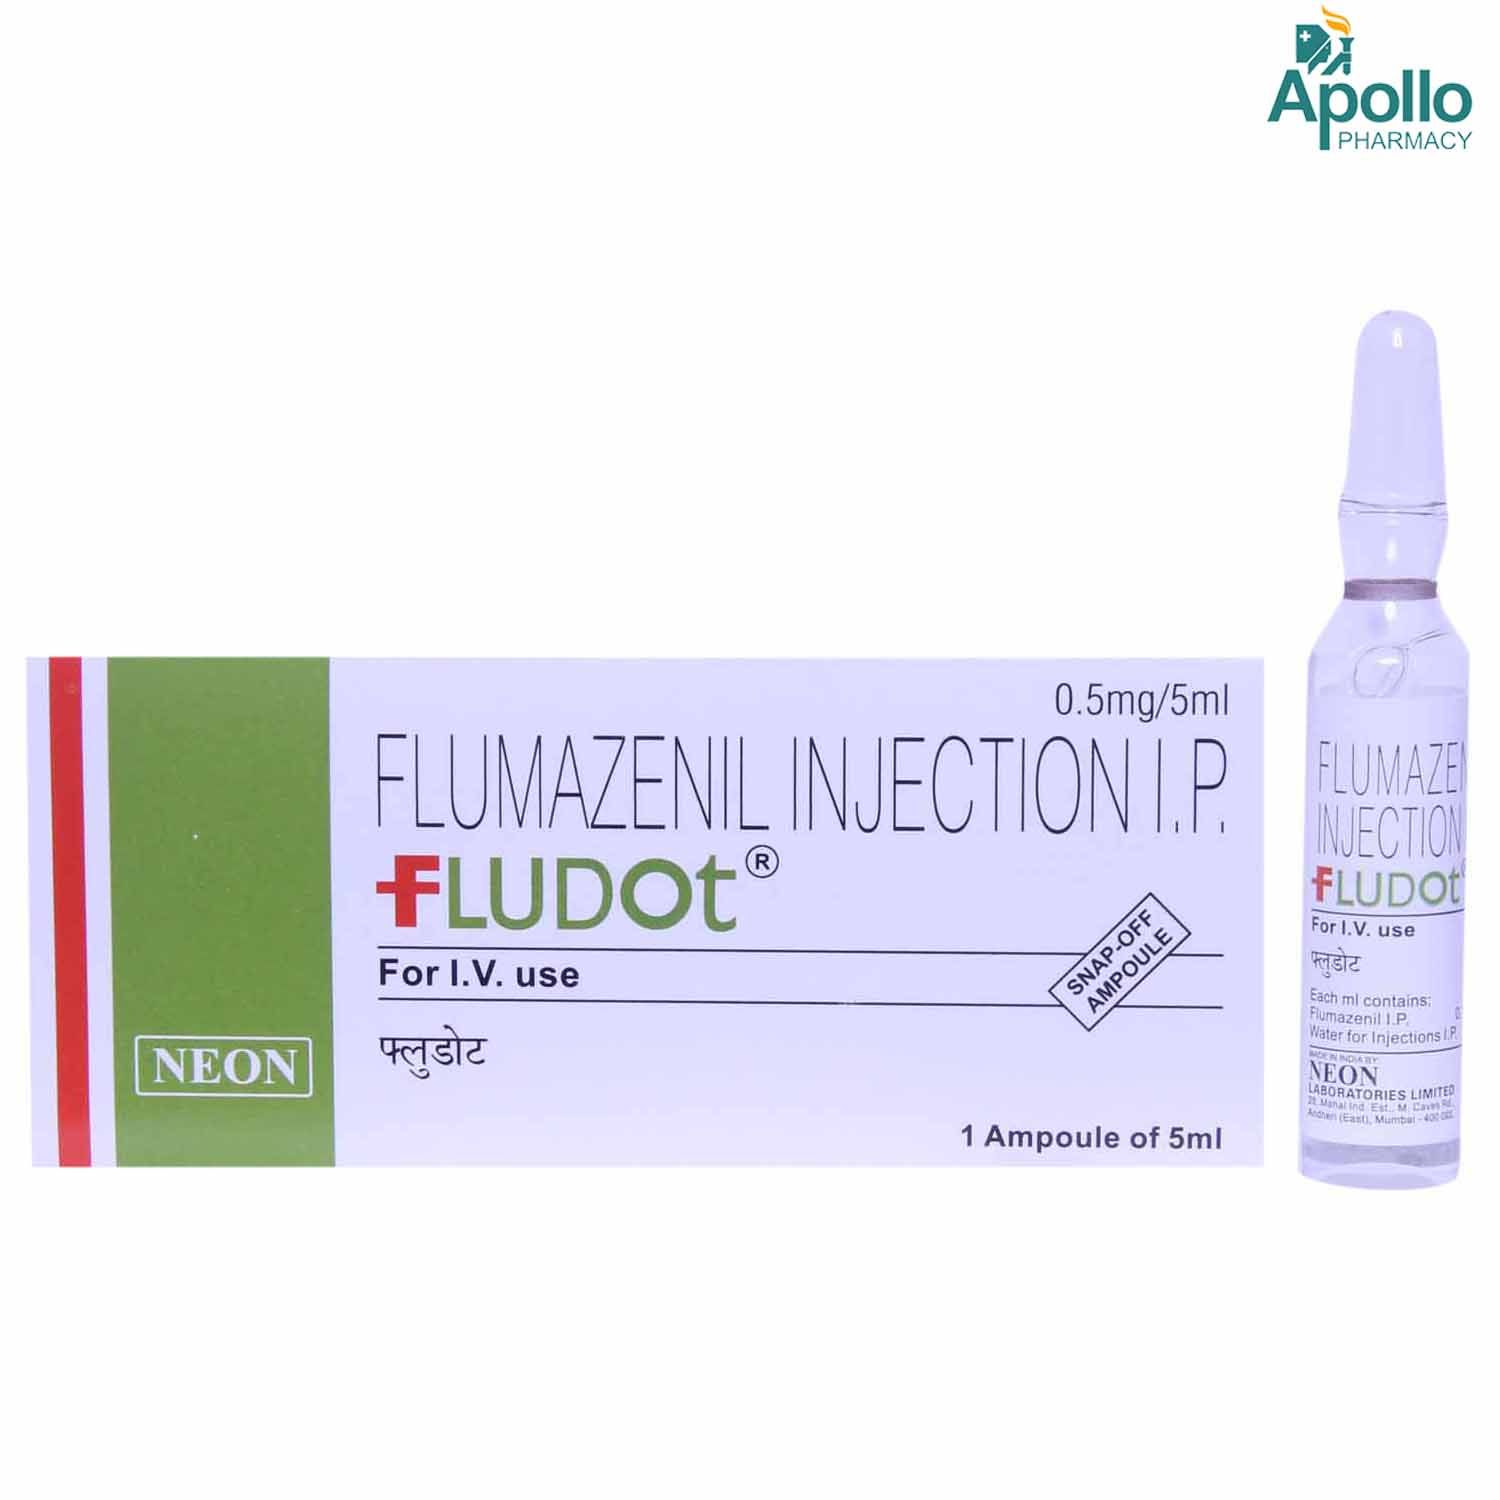 Buy FLUDOT 0.5MG/5ML INJECTION Online